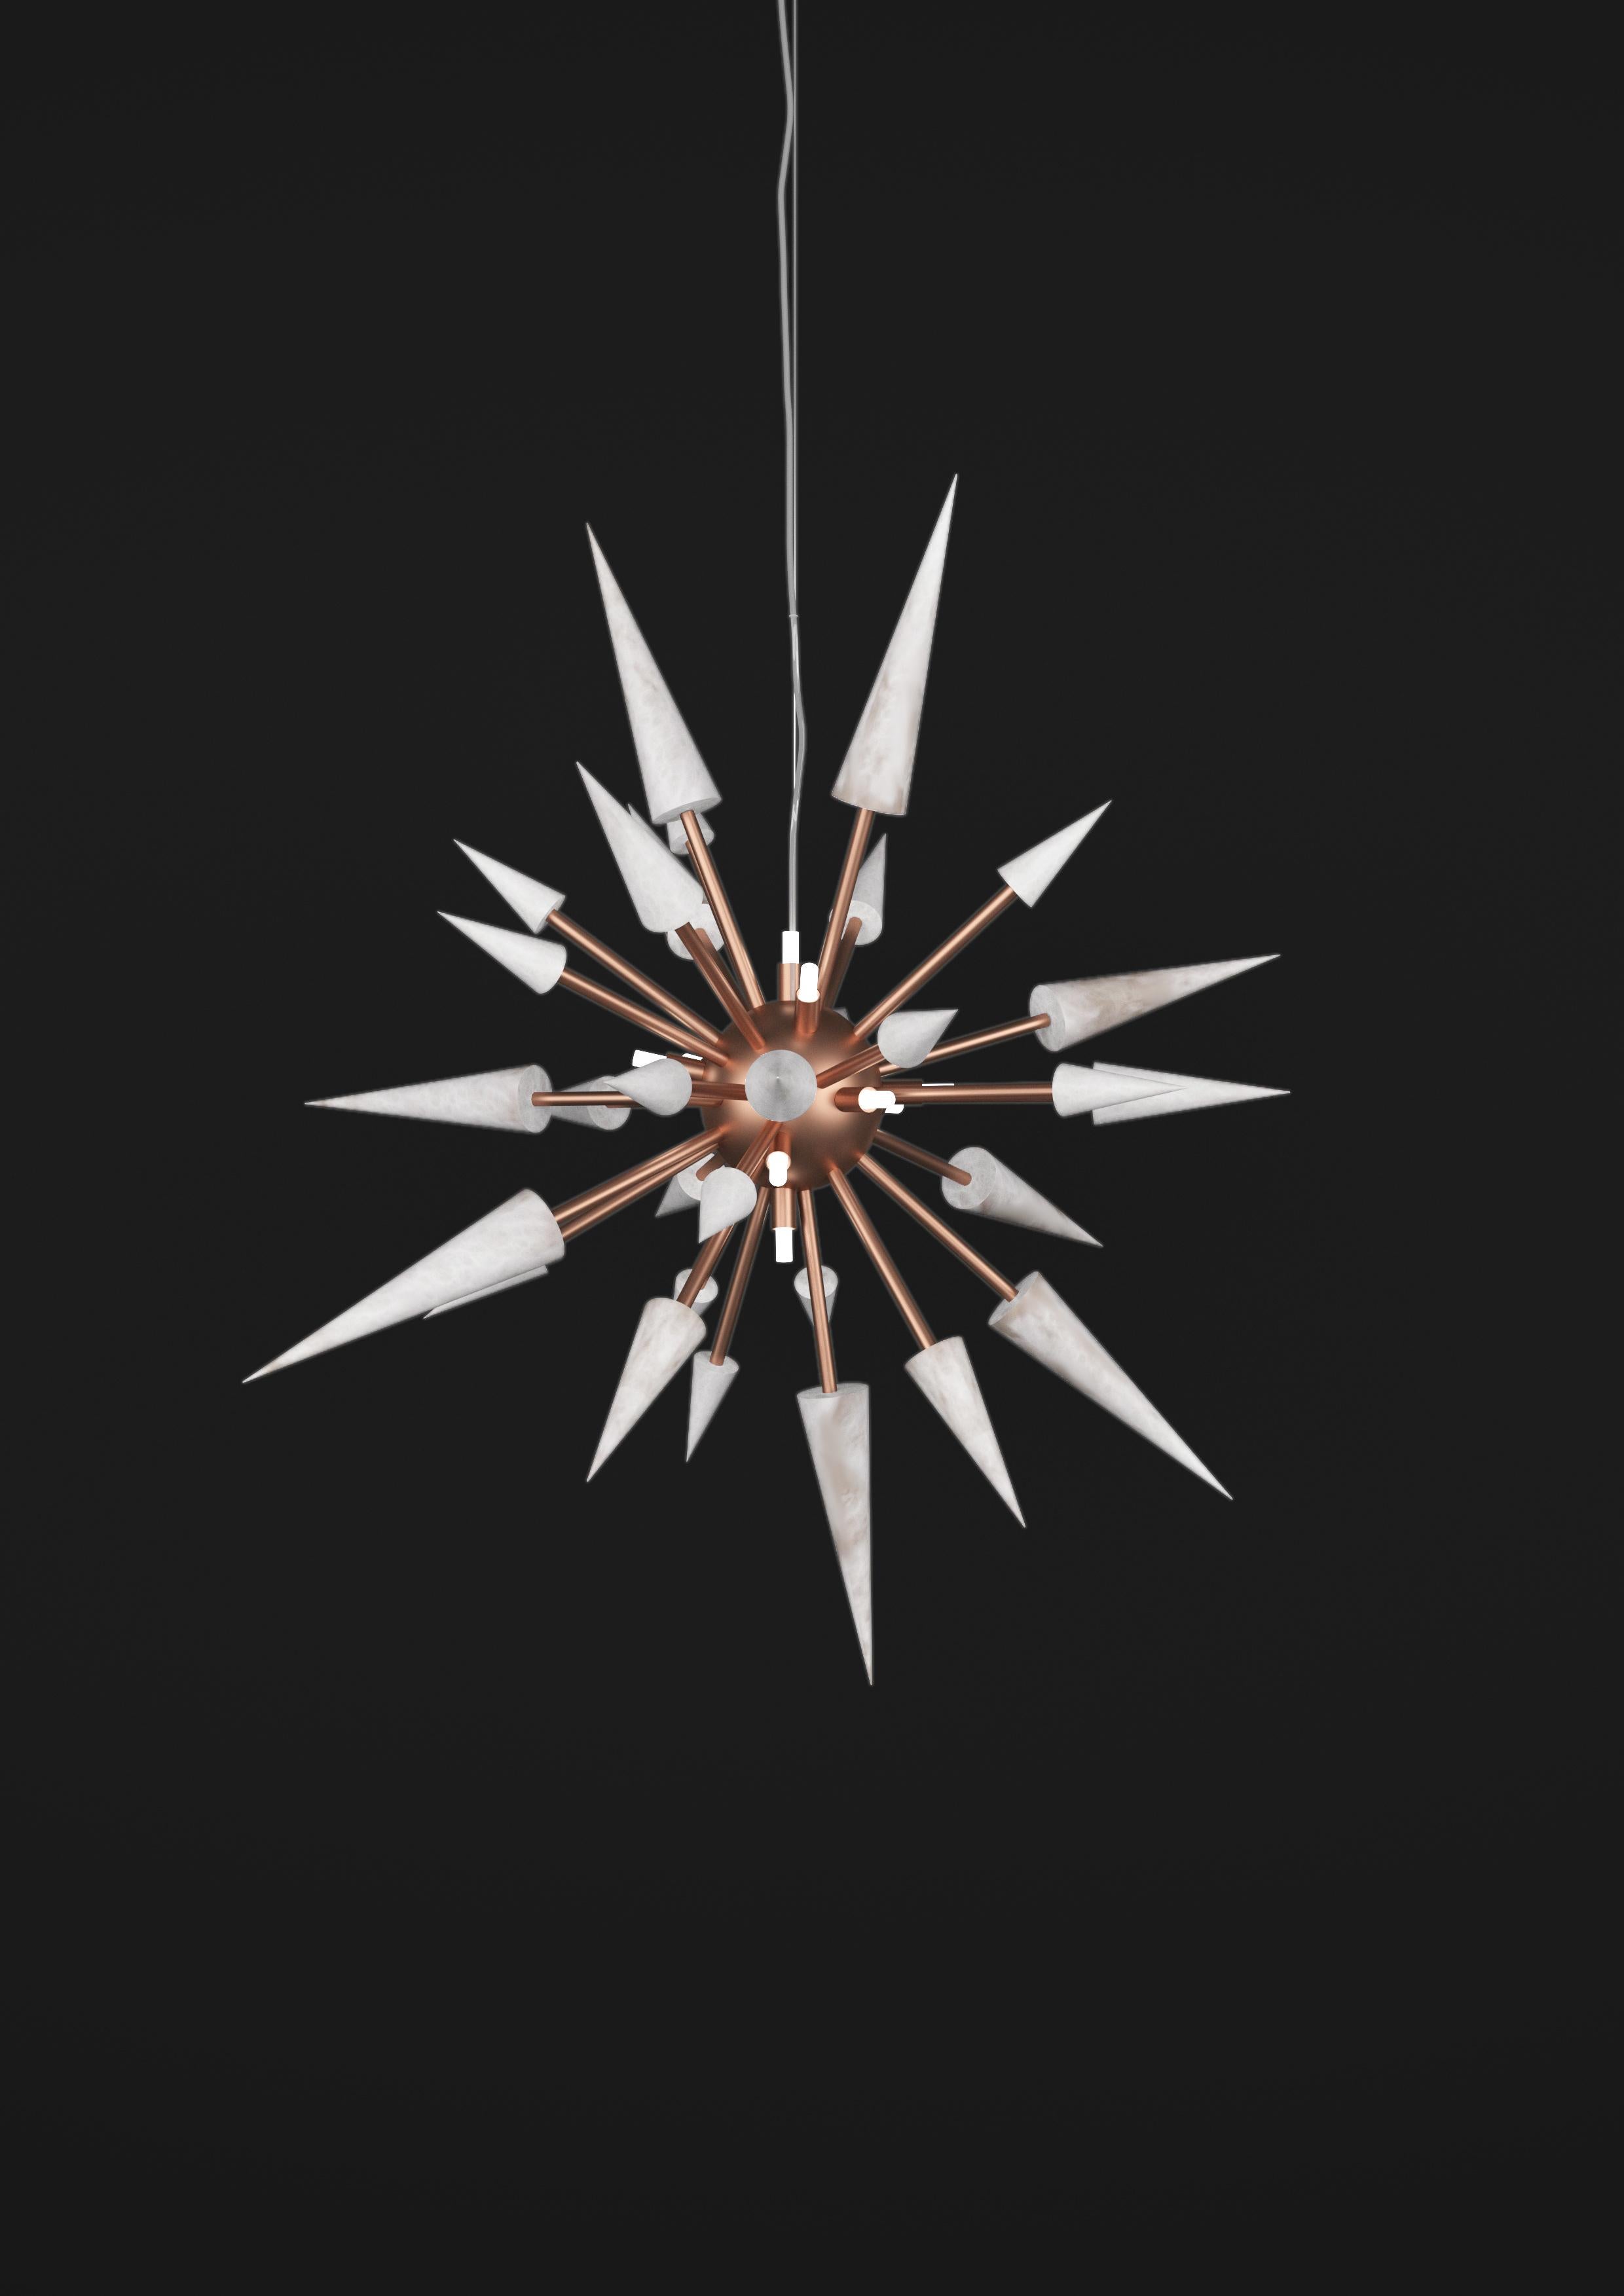 Perseo 100 Copper Pendant Lamp by Alabastro Italiano
Dimensions: Ø 100 x H 300 cm.
Materials: White alabaster and copper.

Available in different finishes: Shiny Silver, Bronze, Brushed Brass, Ruggine of Florence, Brushed Burnished, Shiny Gold,